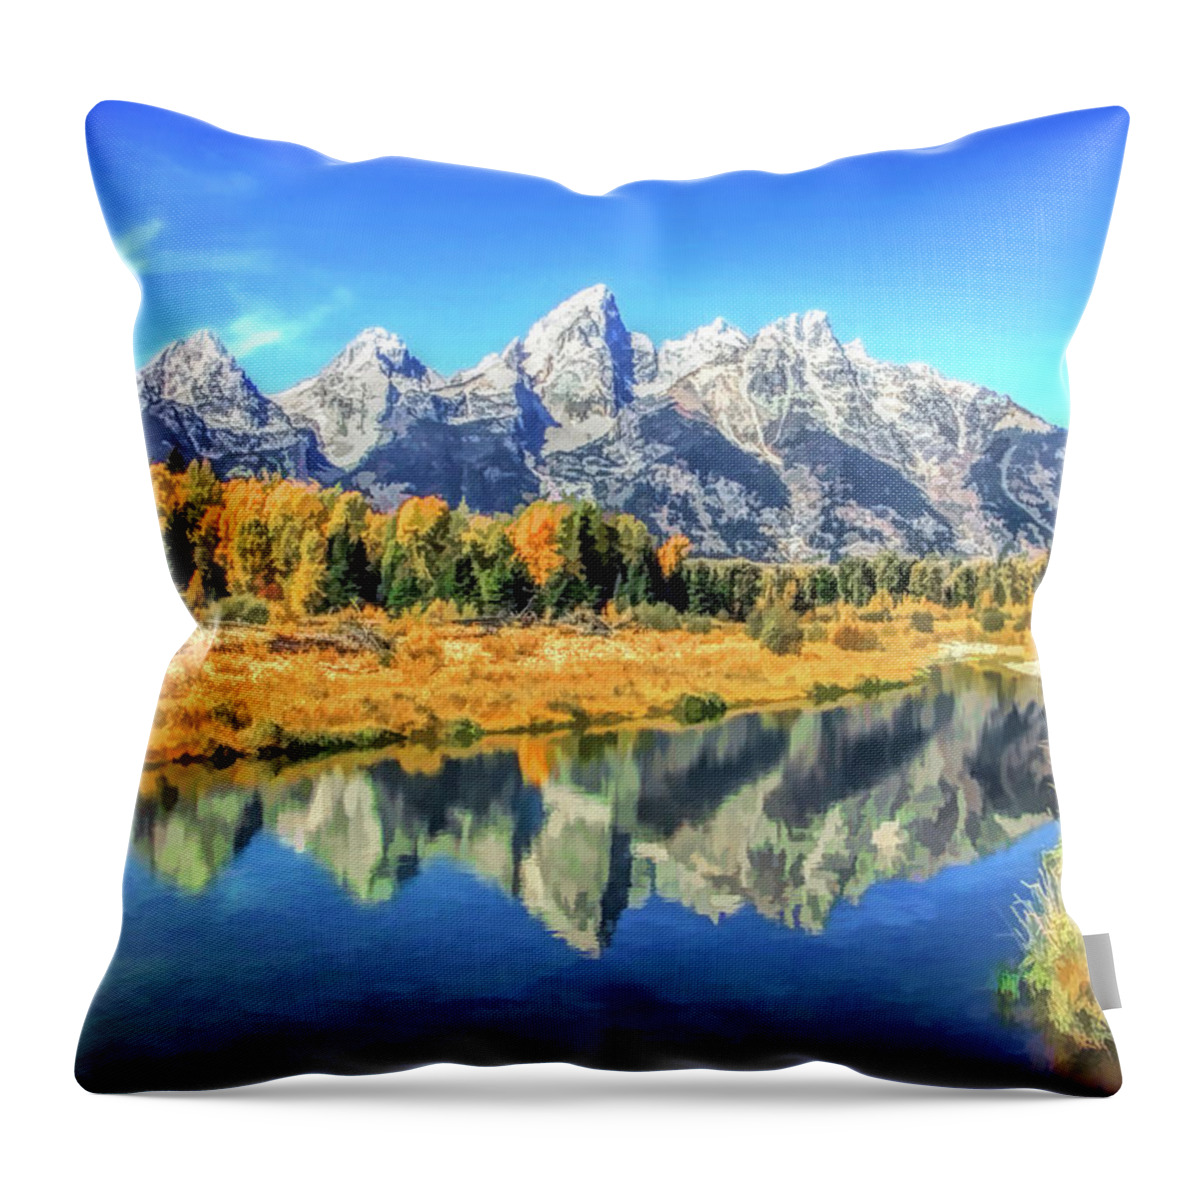 Tetons Throw Pillow featuring the painting Grand Teton National Park Mountain Reflections by Christopher Arndt